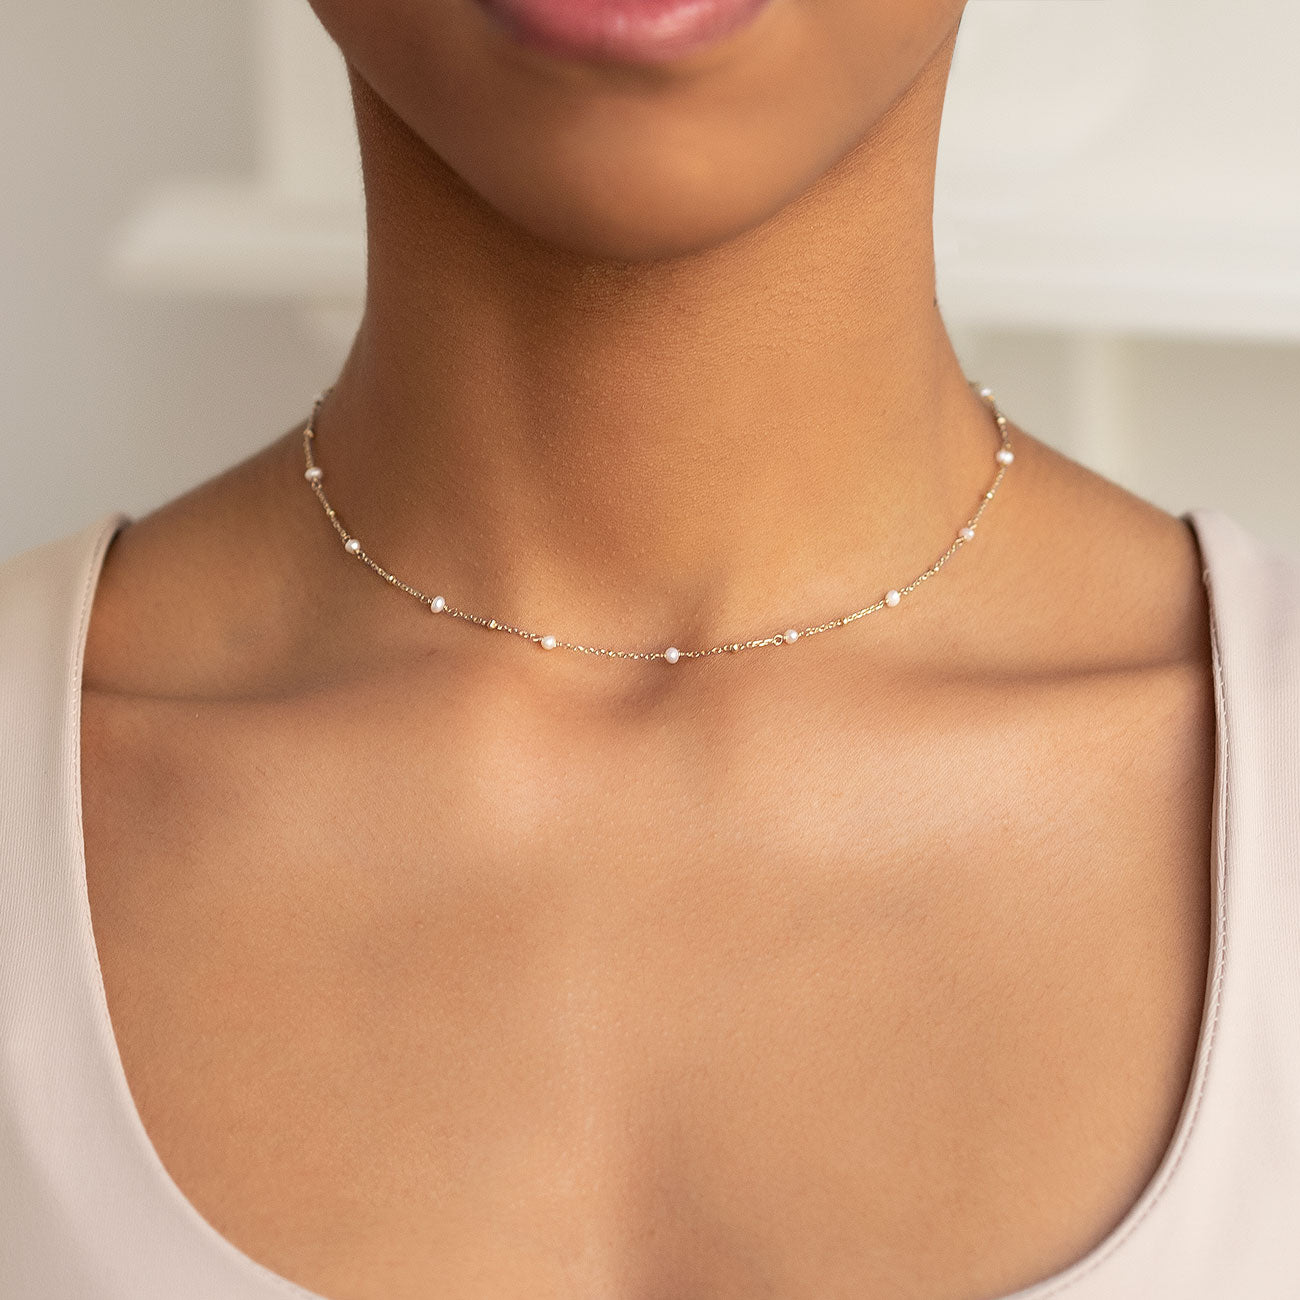 Dainty Sterling Silver Choker Necklace Satellite Ball Chain All Length  Available | eBay